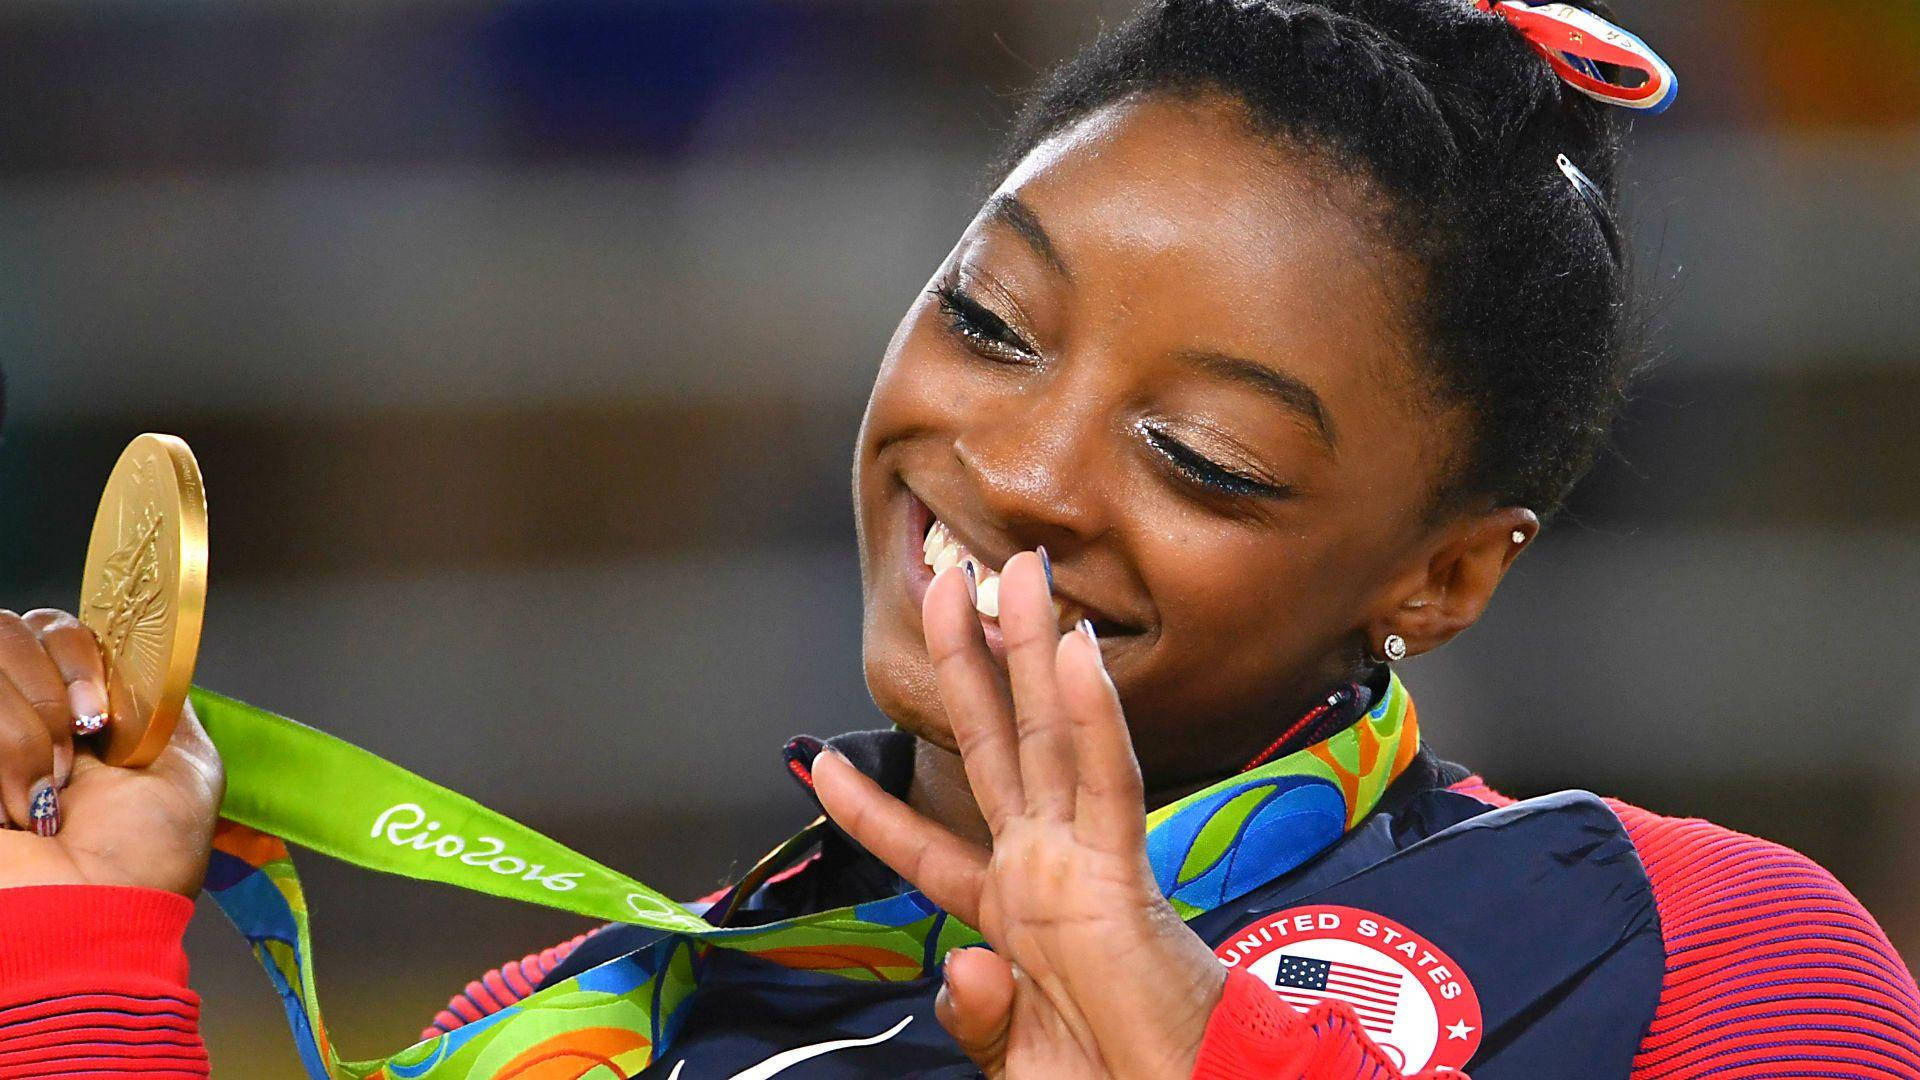 Simone Biles With Gold Medal Background